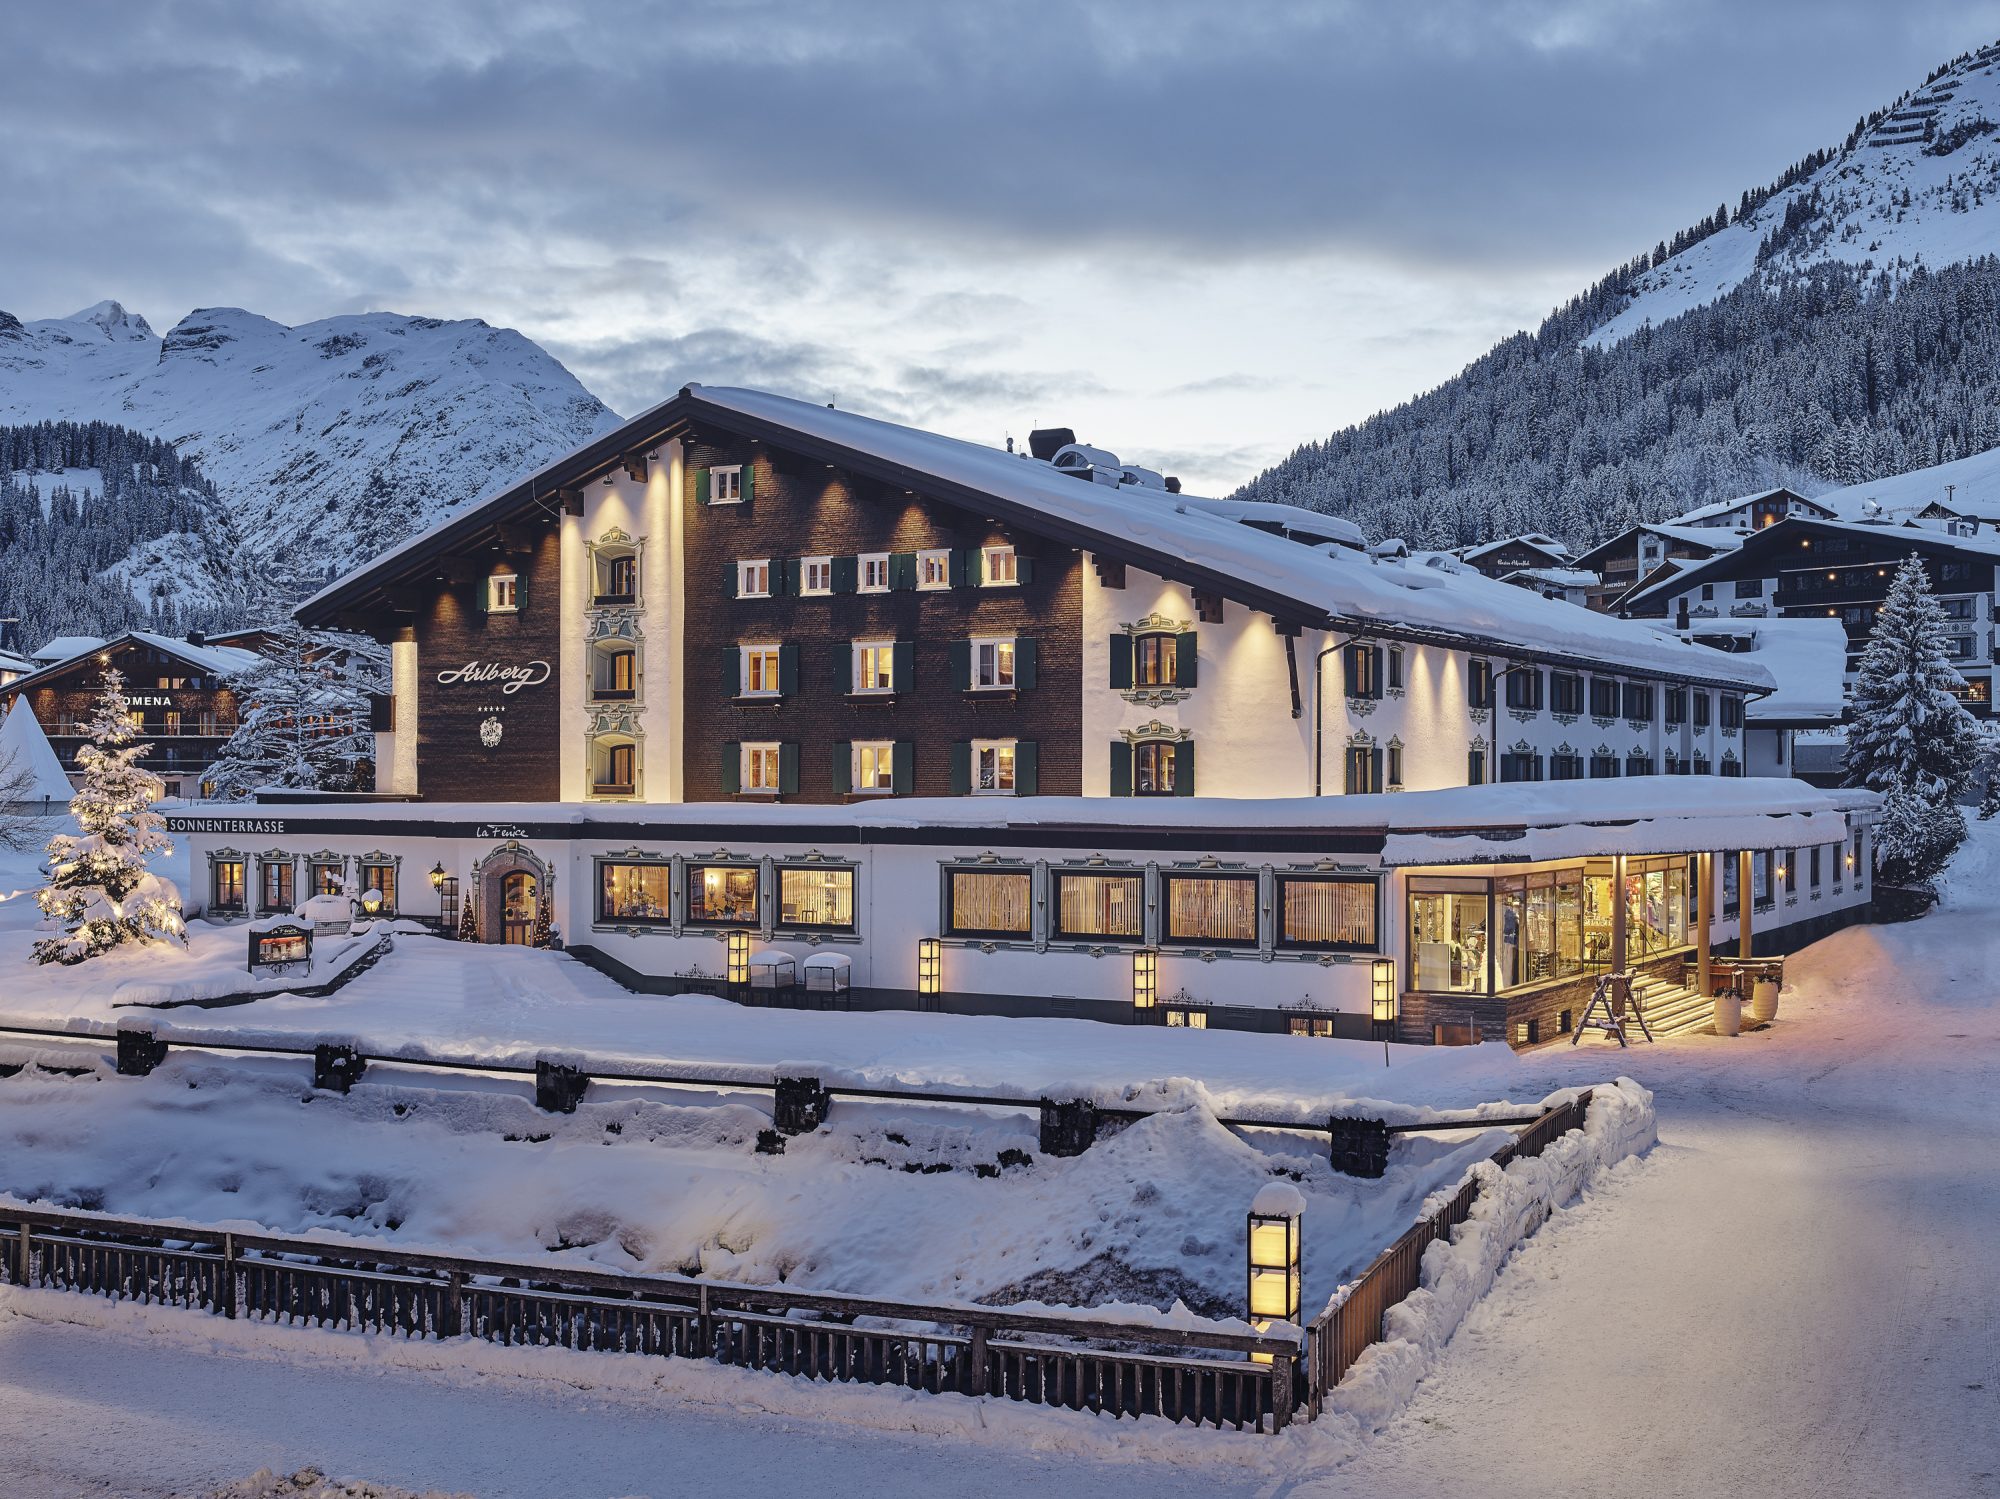 Hotel Arlberg exterior - Photo Alex Kaiser. The Must-Read Guide to Lech.